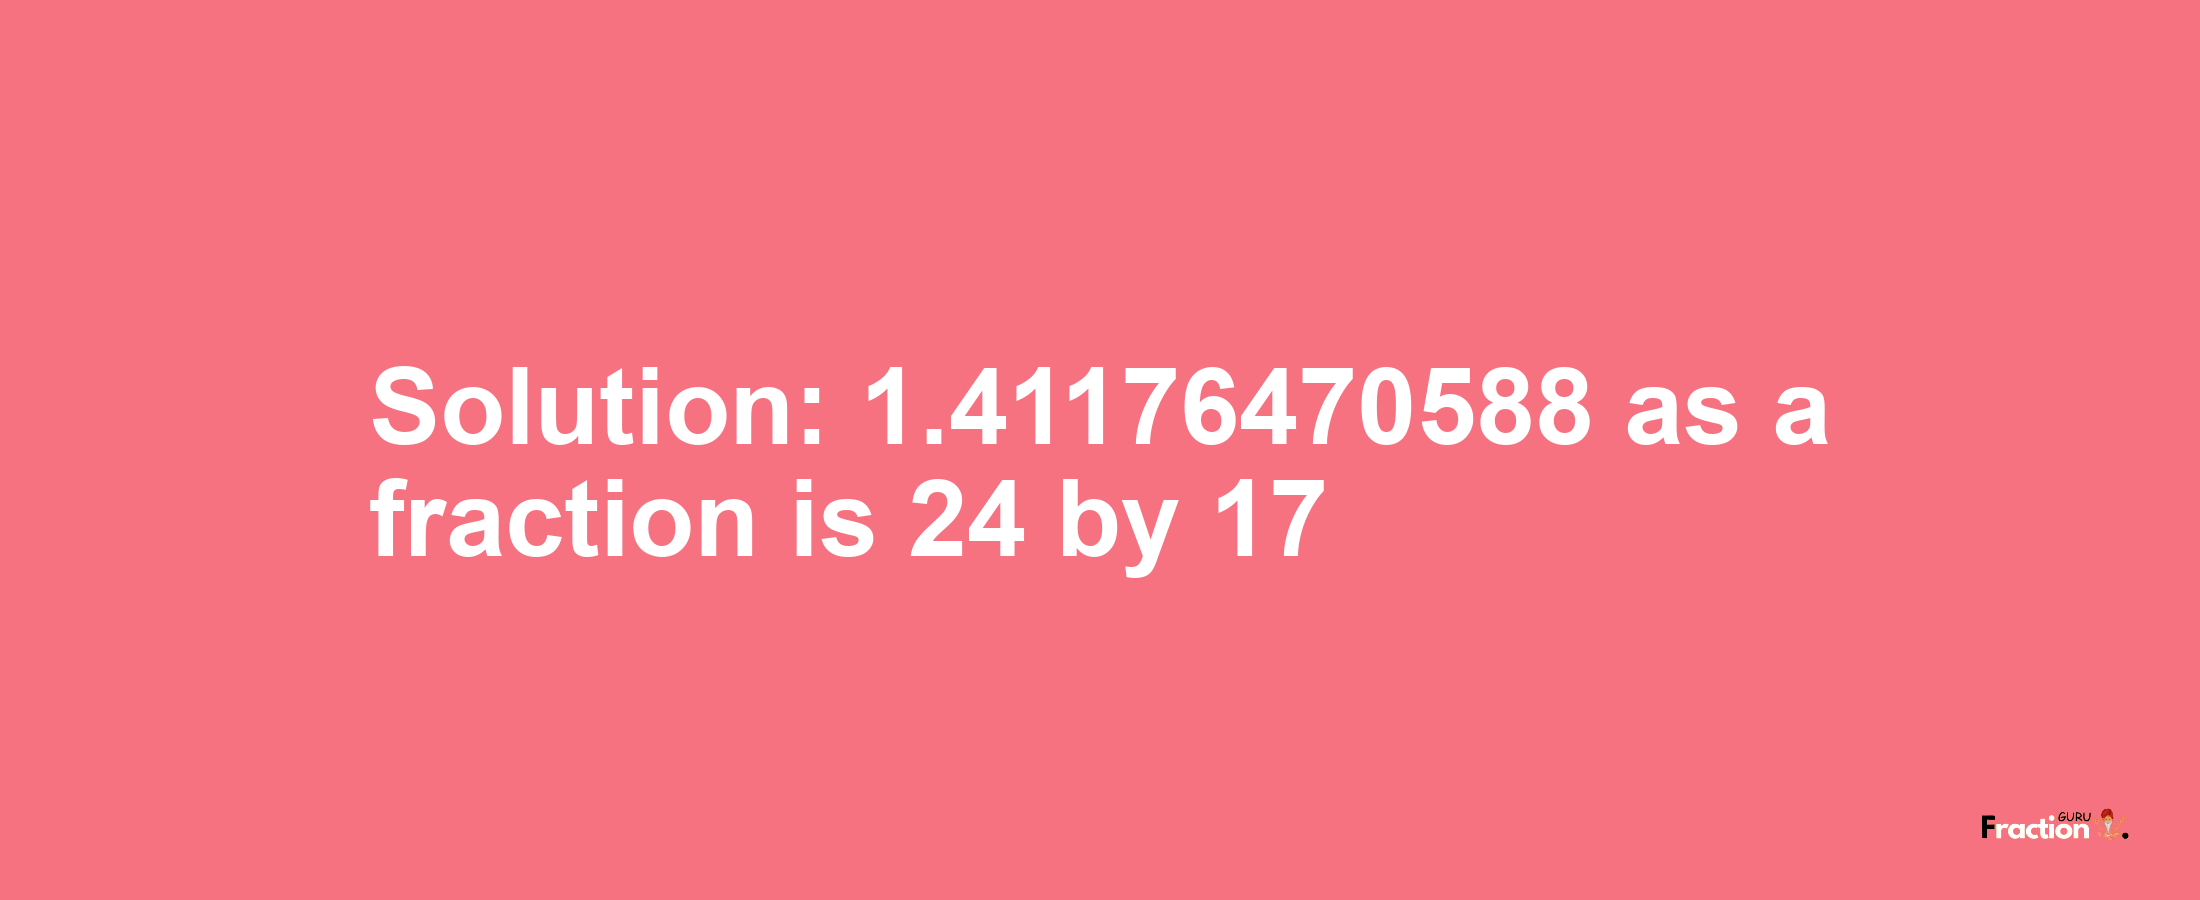 Solution:1.41176470588 as a fraction is 24/17